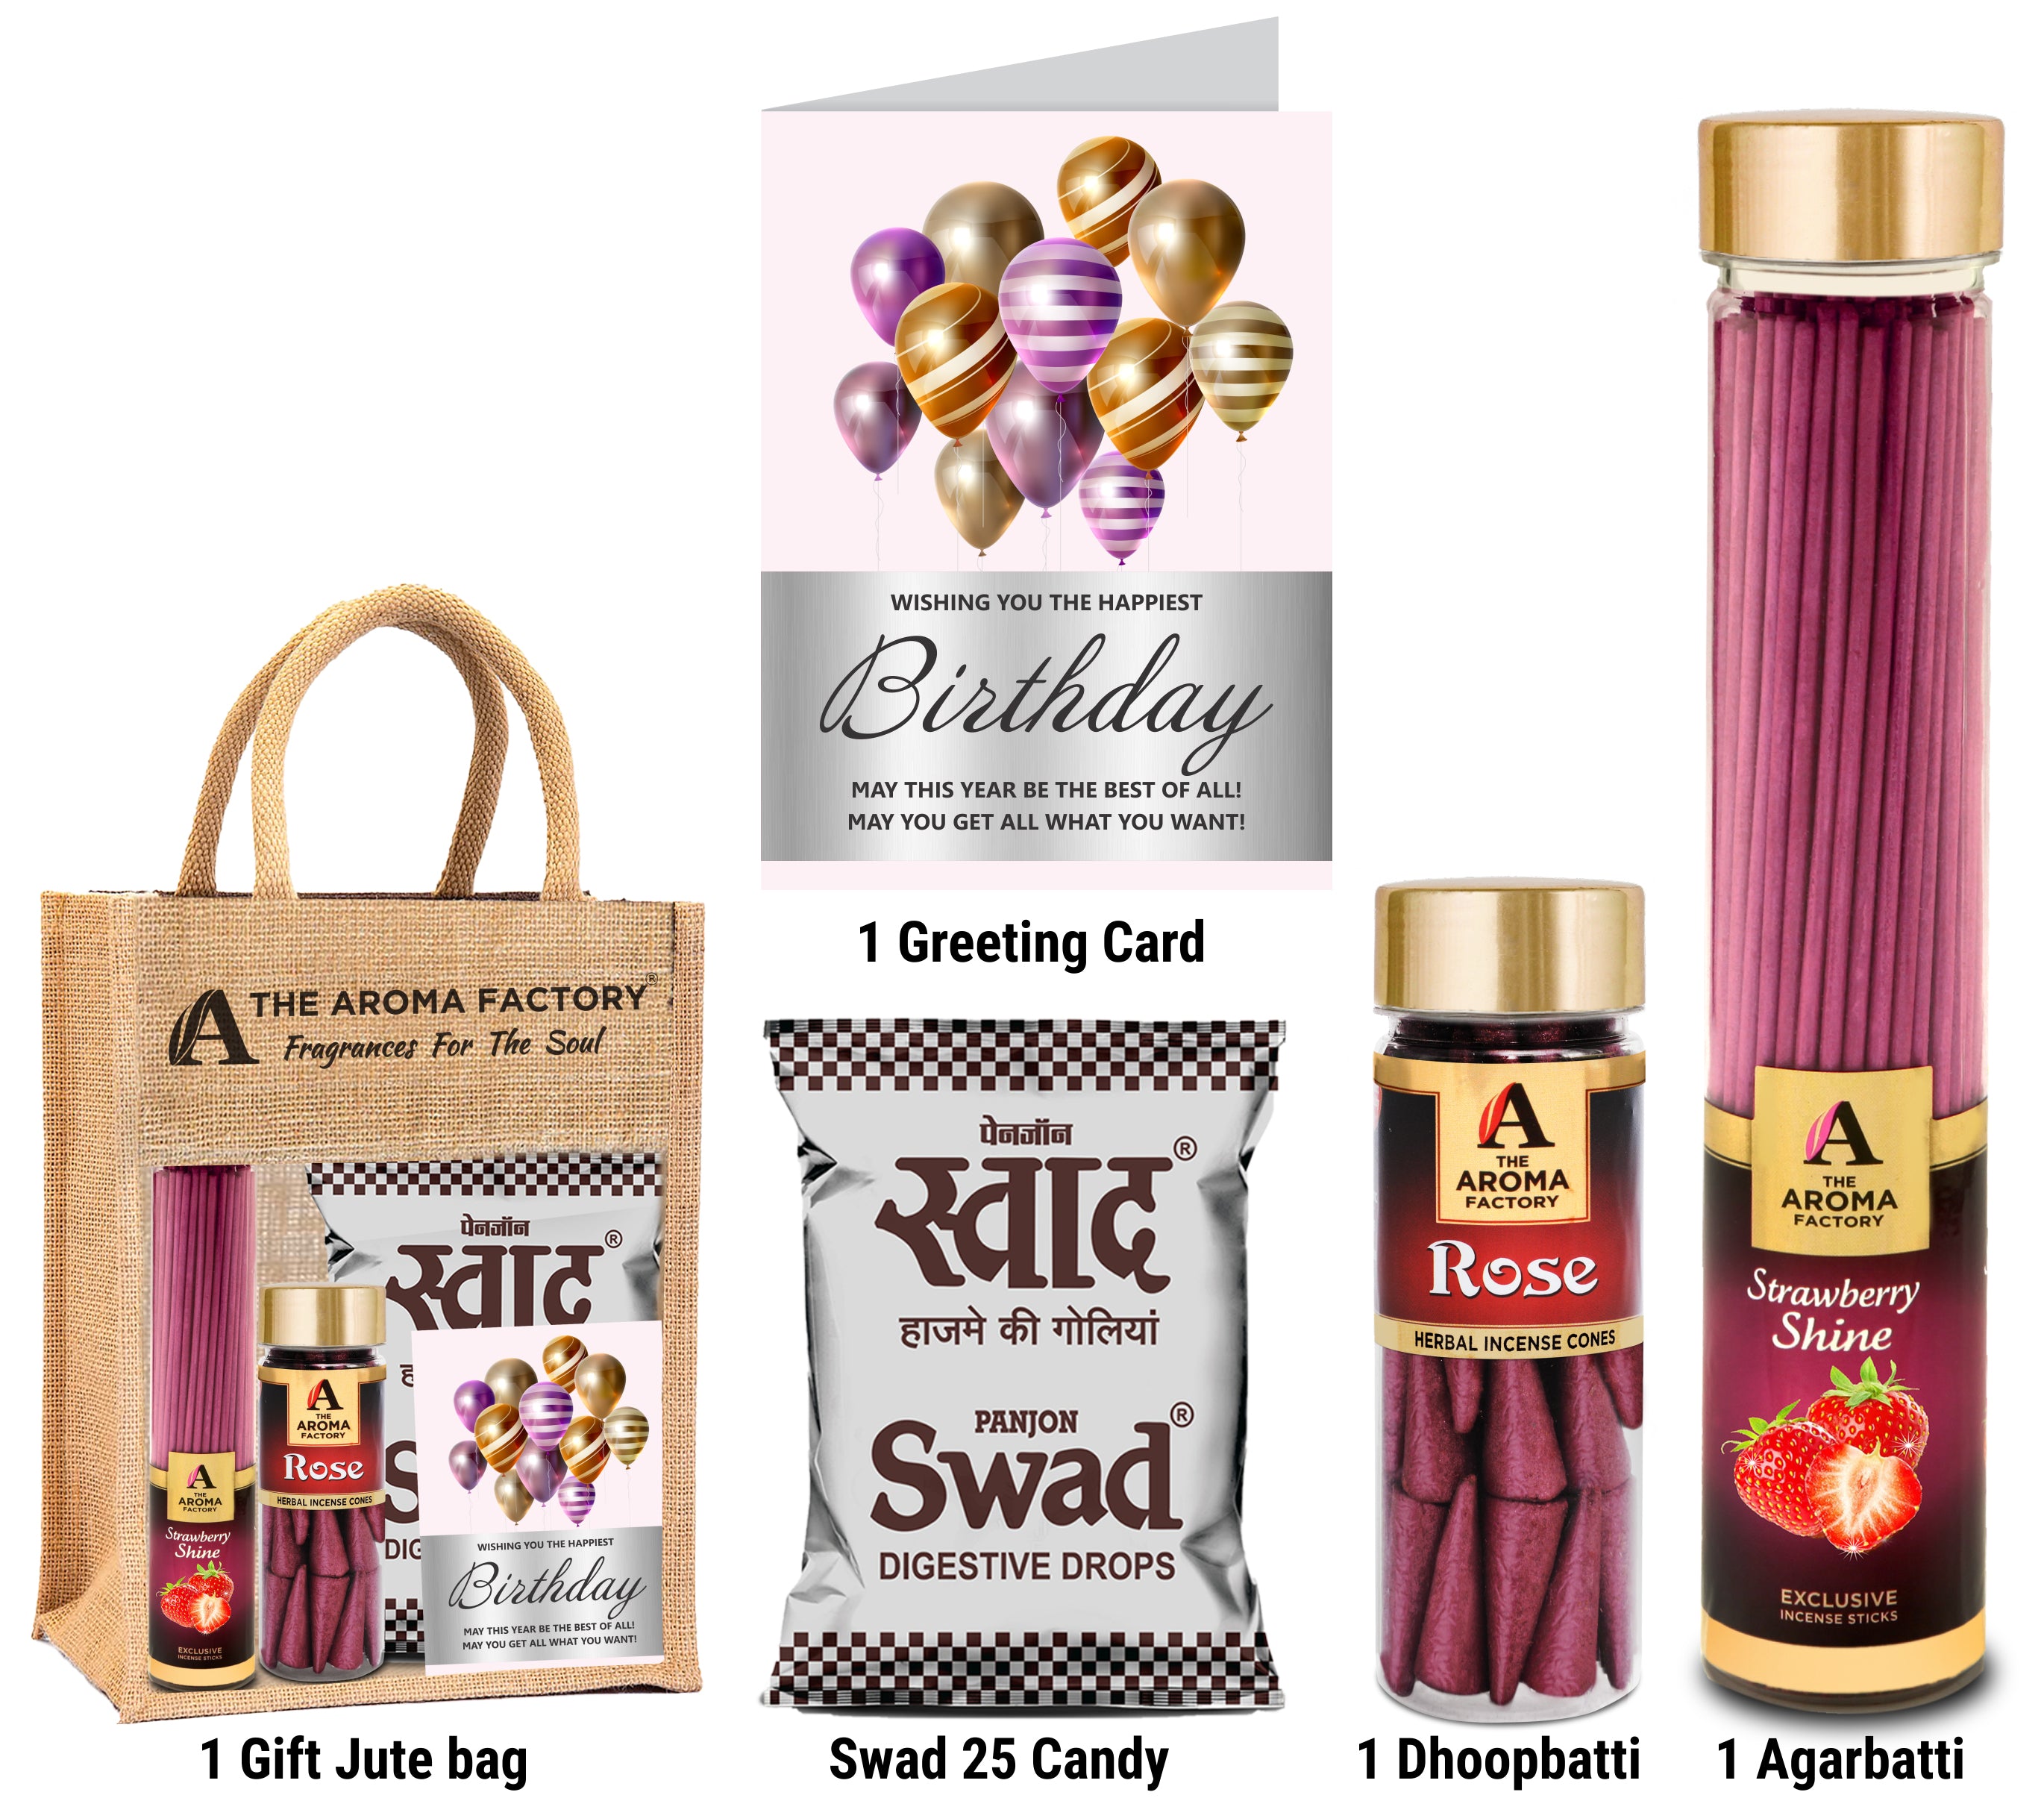 The Aroma Factory Happy Birthday Friend Gift with Card (25 Swad Candy, Strawberry Agarbatti Bottle, Rose Cone) in Jute Bag